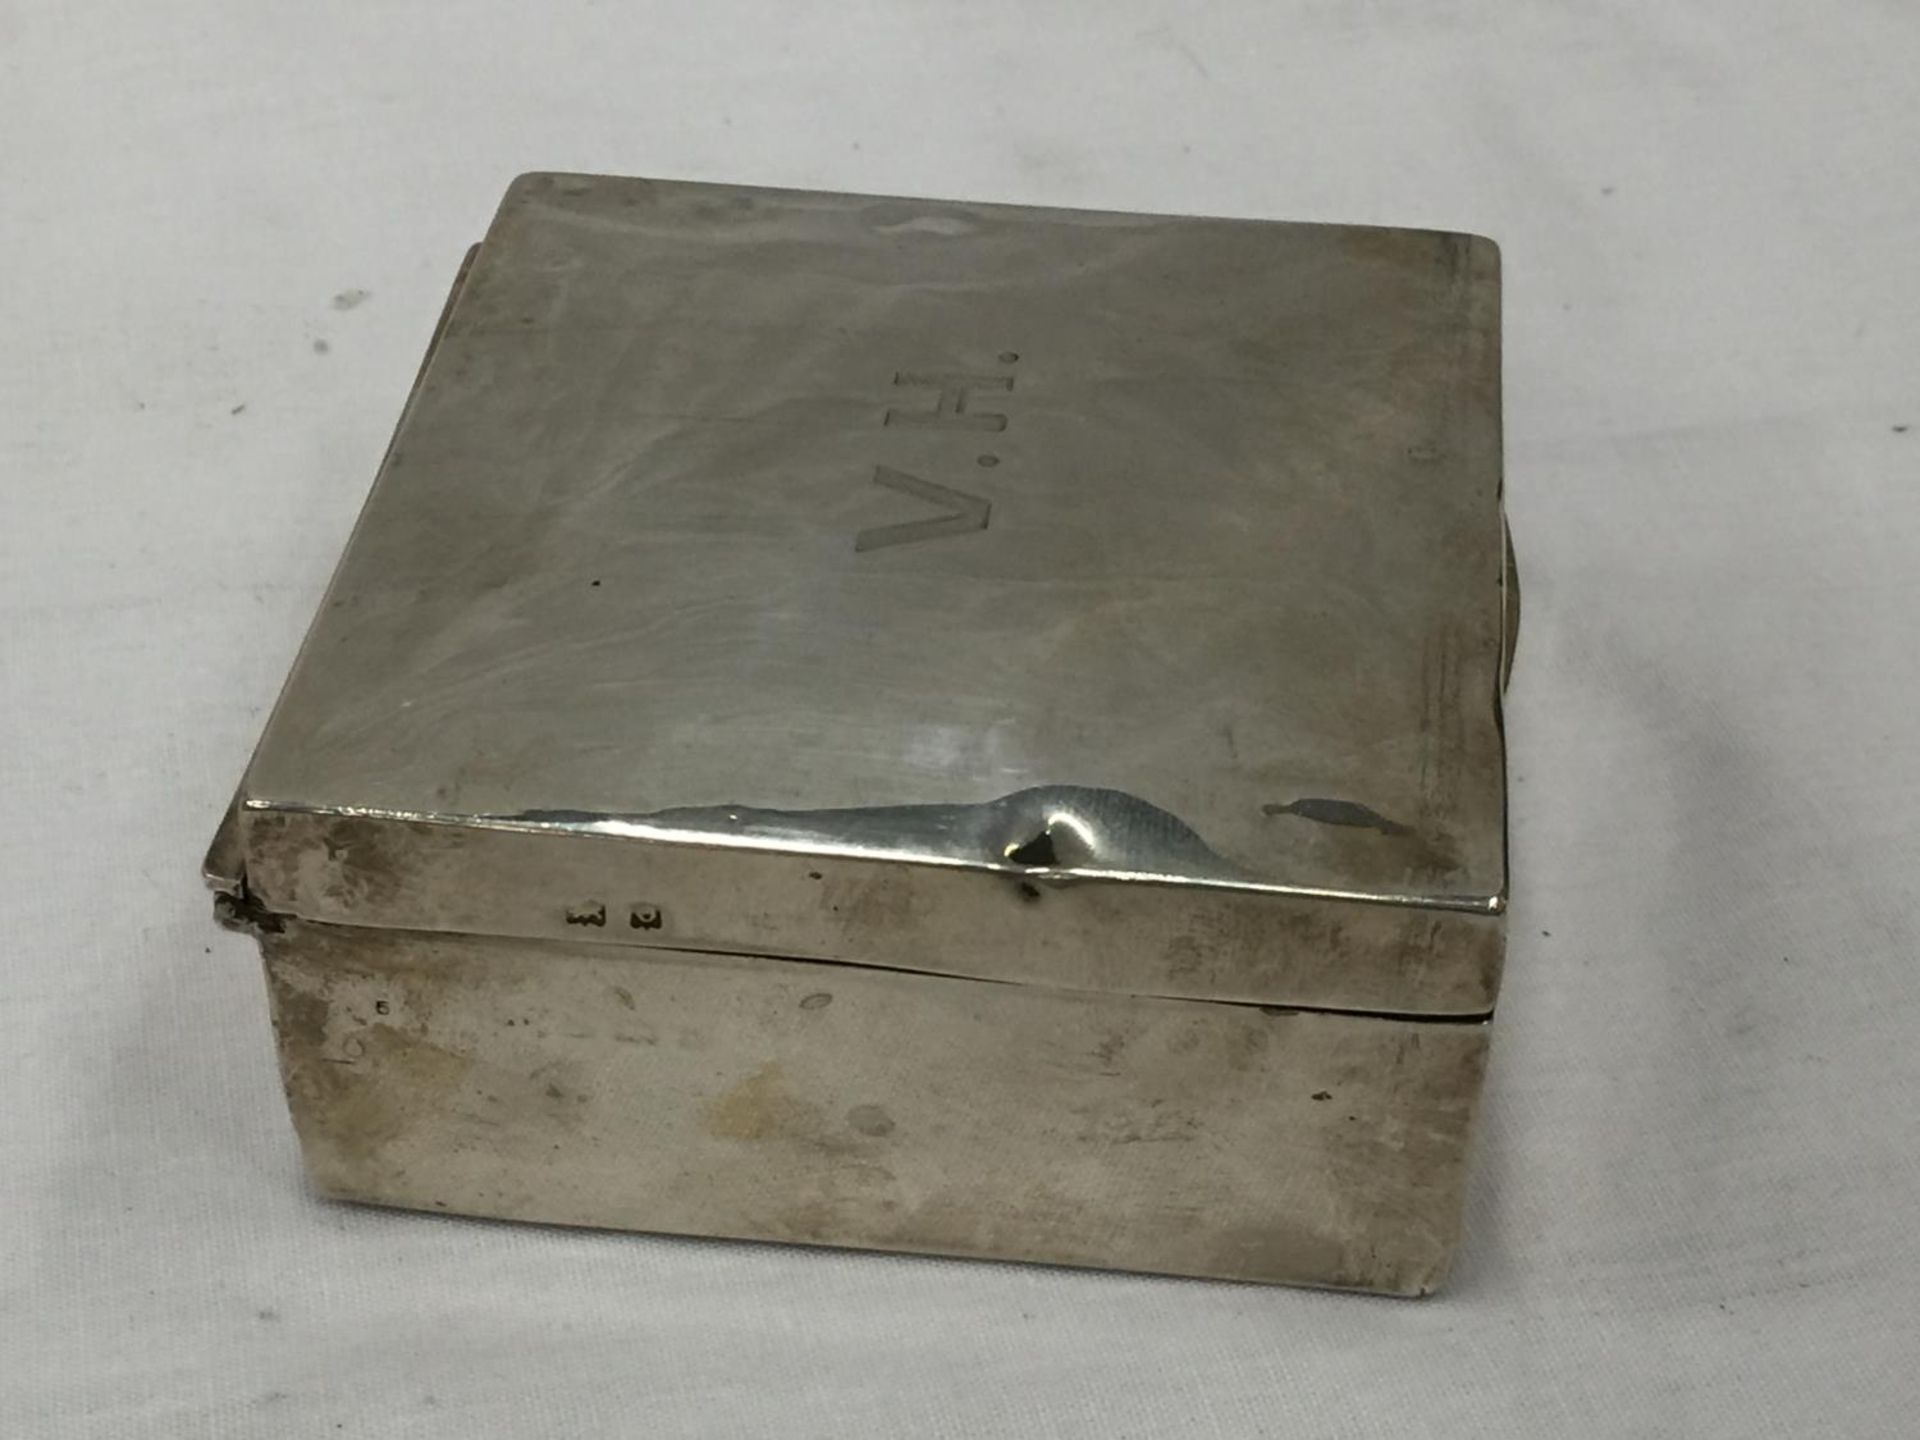 A HALLMARKED (INDISTINCT) SILVER TRINKET BOX WITH WOODEN LINING. WEIGHT: 234 GRAMS - Image 5 of 8